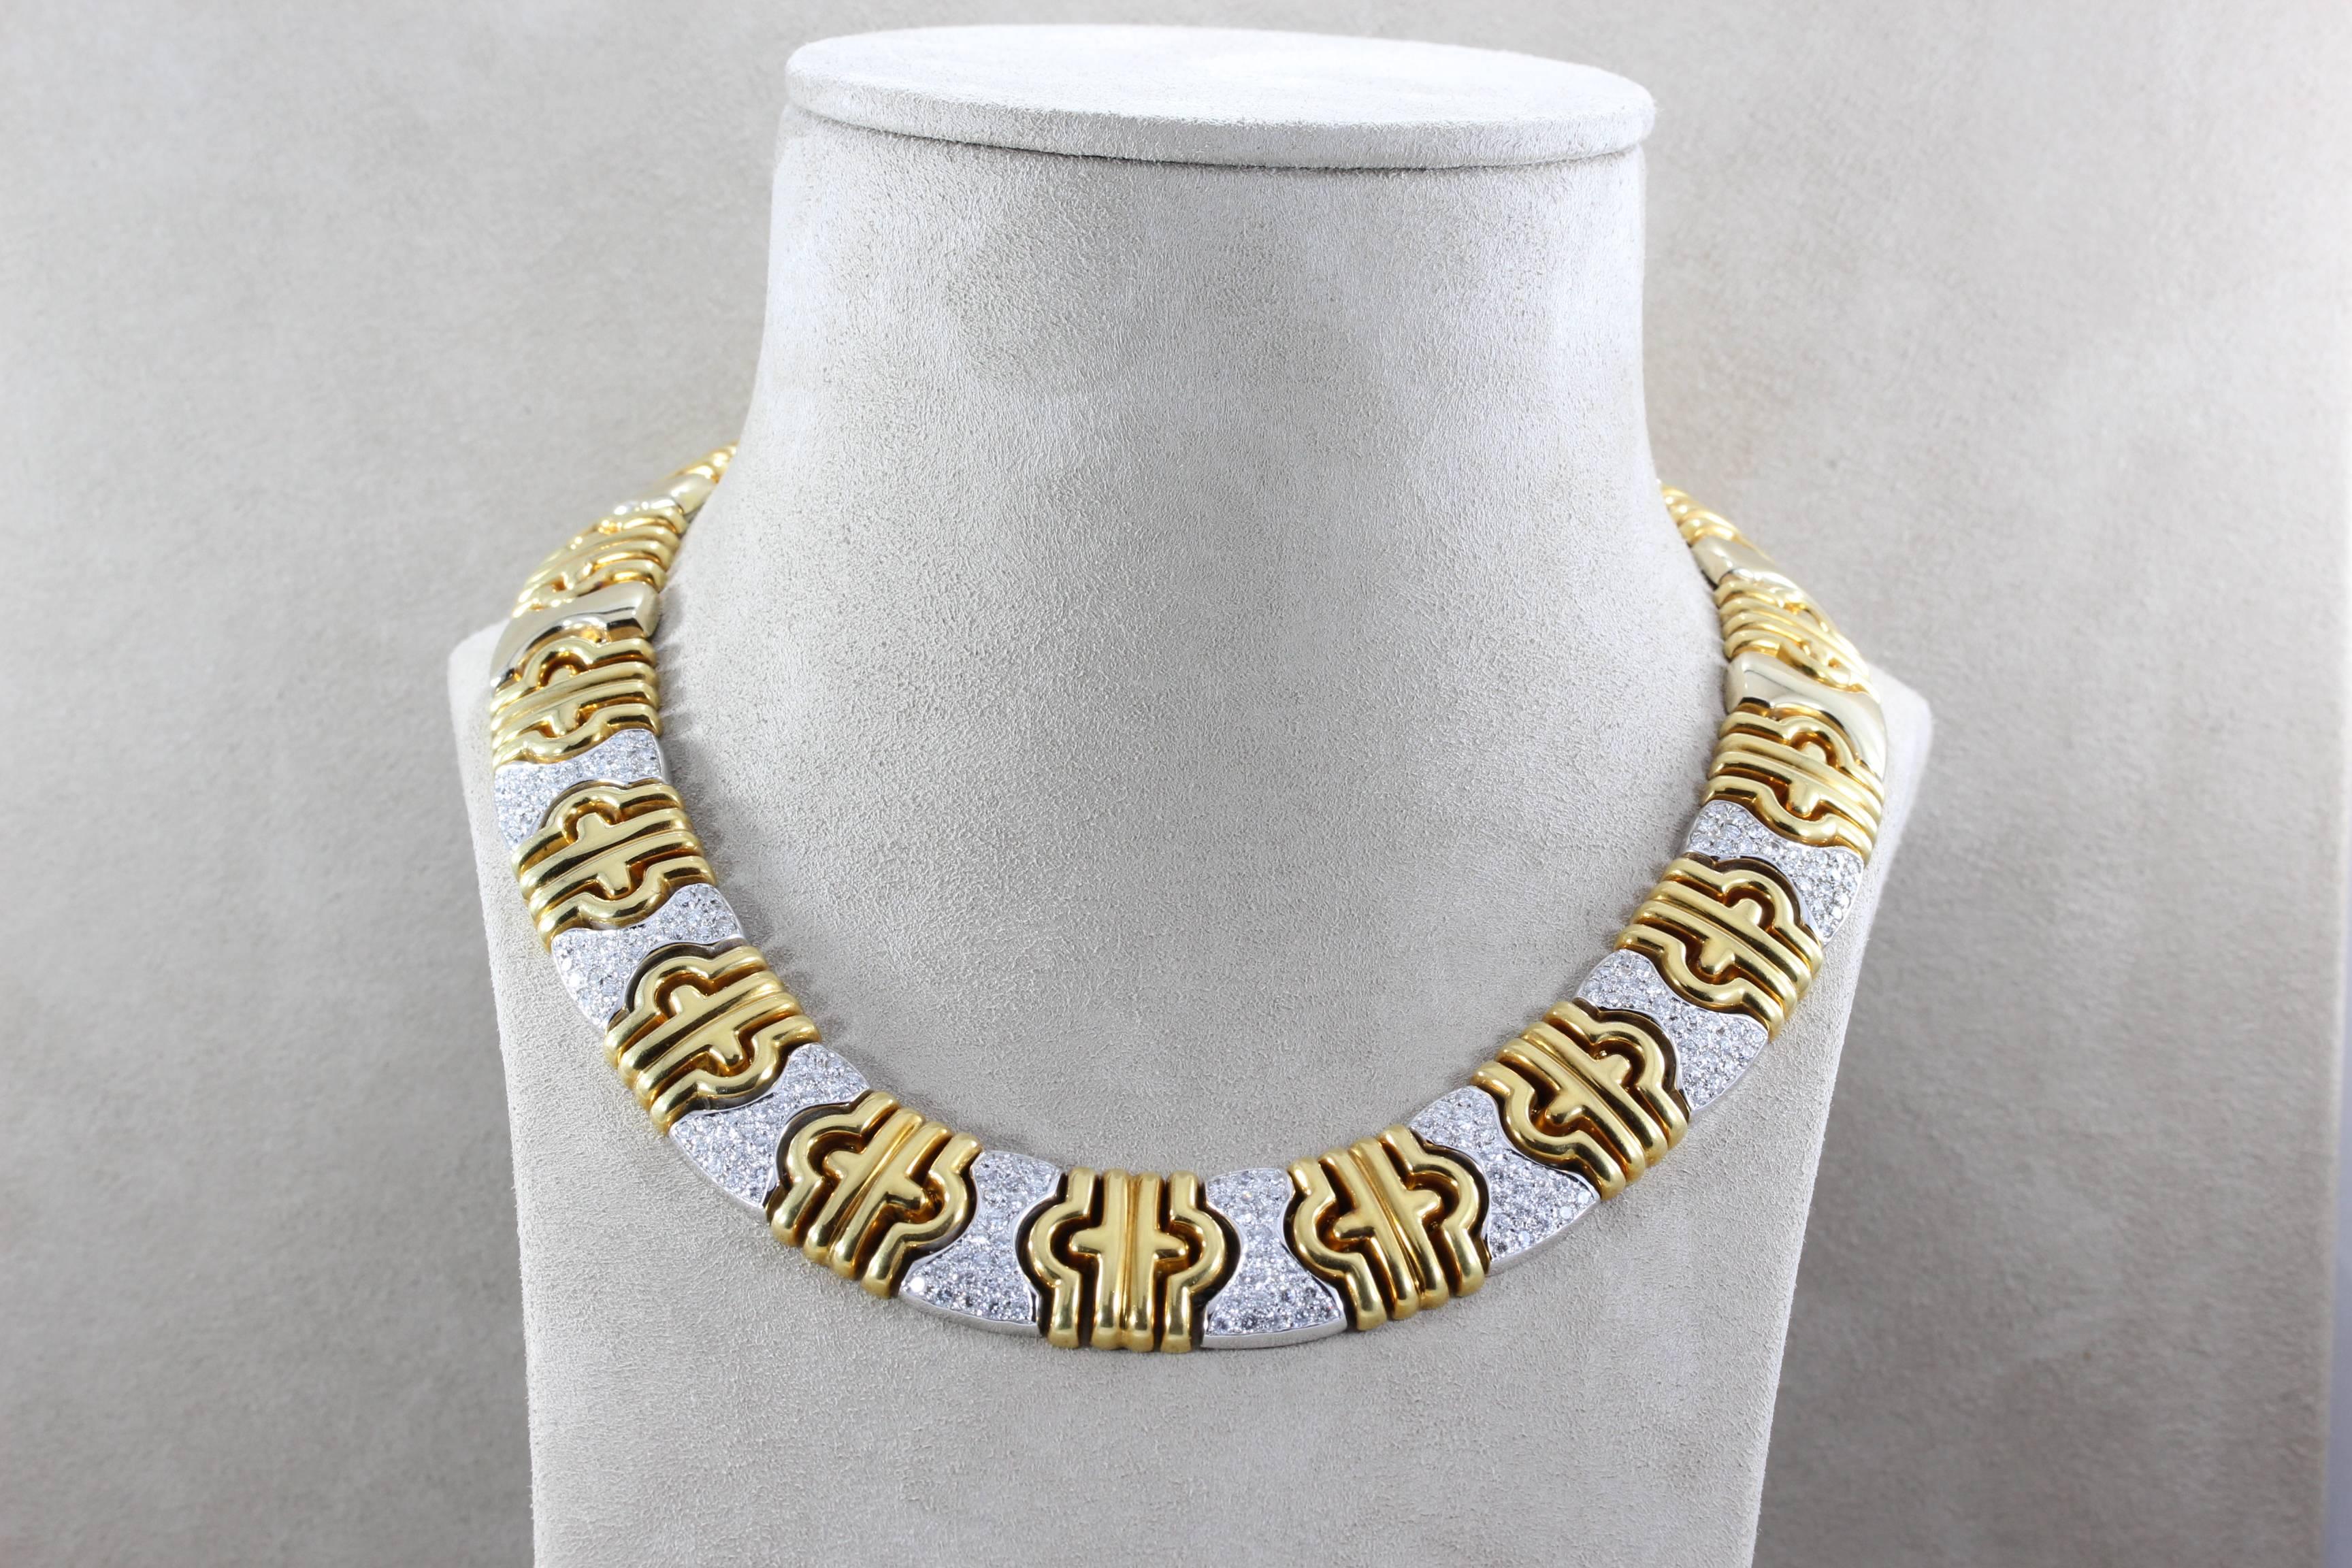 An Italian made two-tone necklace made of 18K yellow and white gold featuring 5.11 carats of diamonds set in 18K white gold. The necklace comes with extra links that extend the length to 17 inches. 

Dimensions: 15.00 x 0.75 inches
